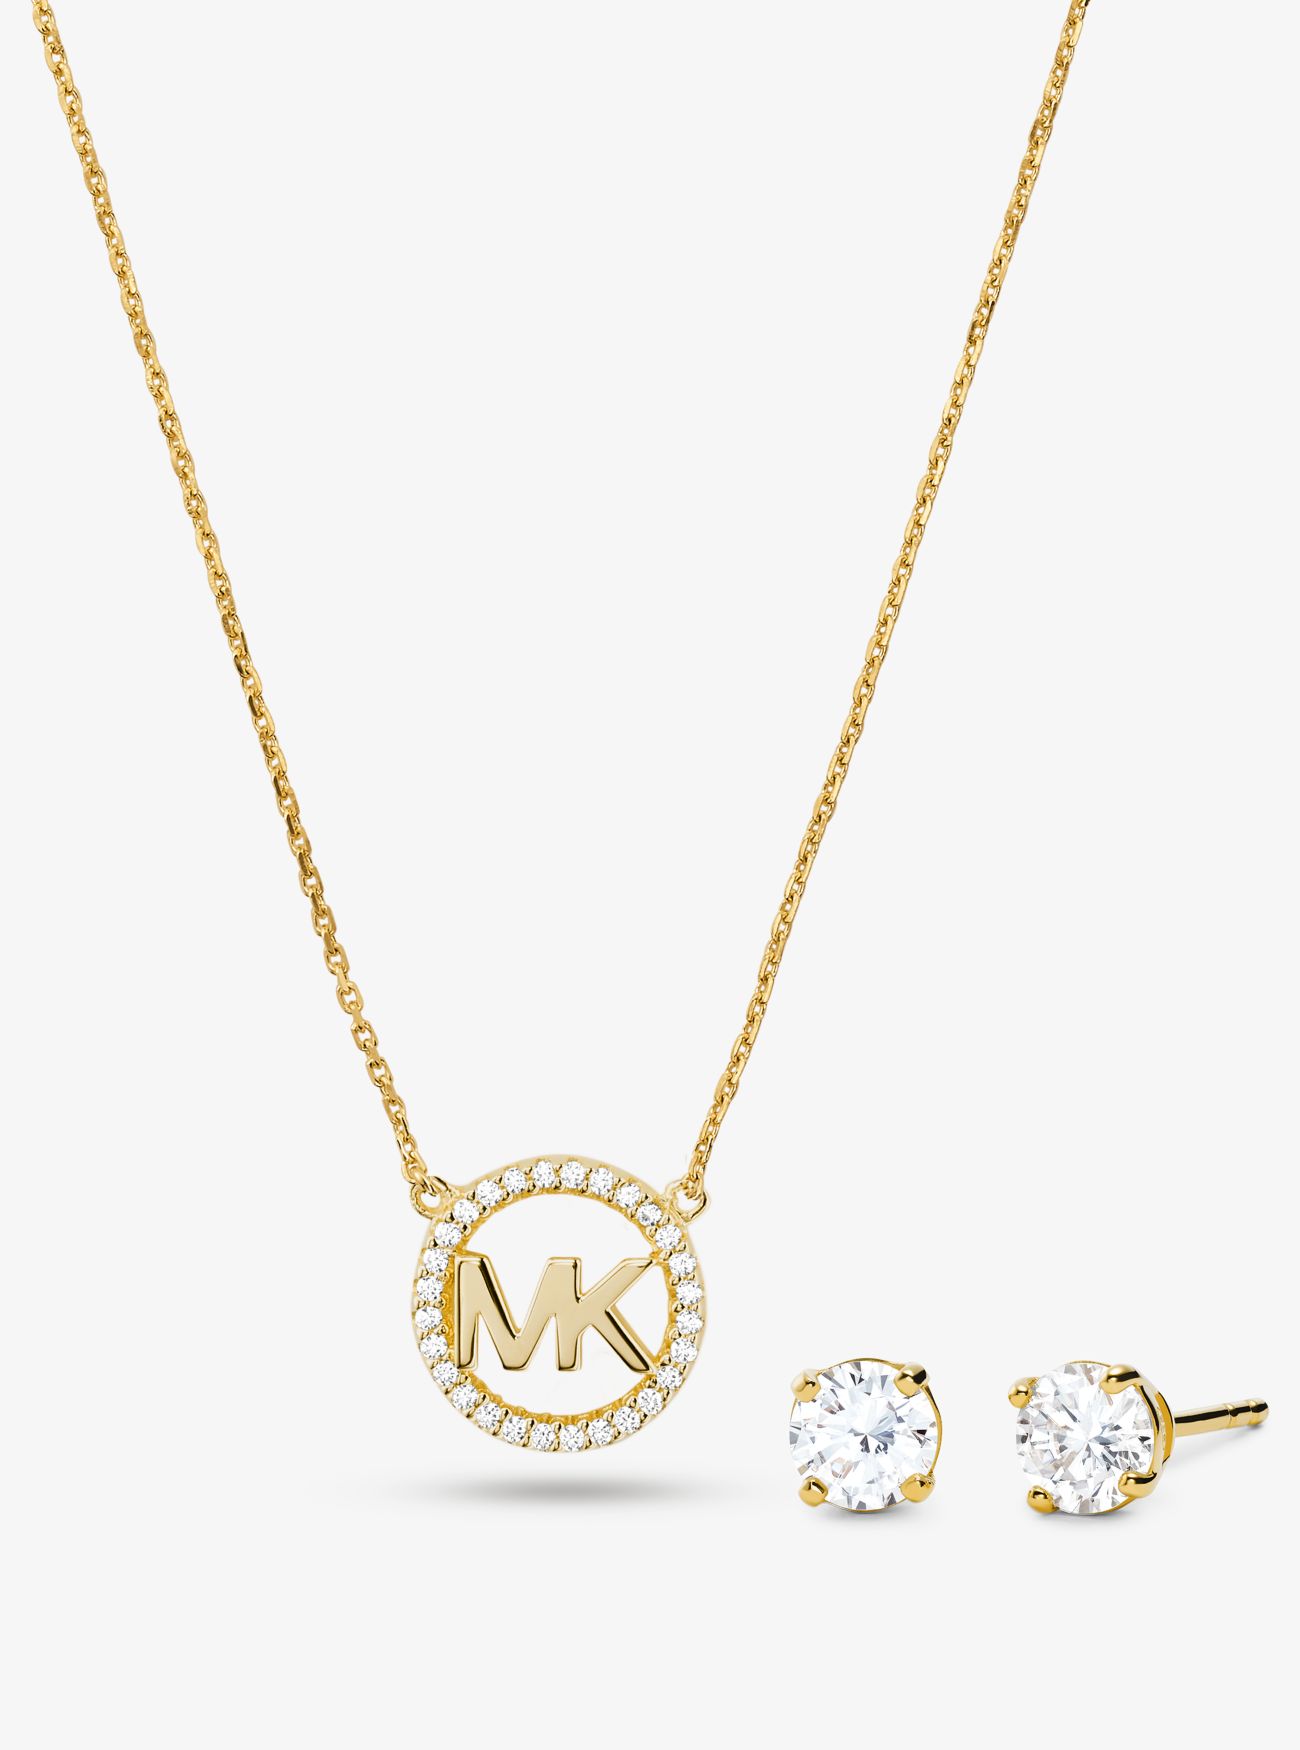 MK 14K Rose Gold-Plated Sterling Silver PavÃ© Logo Charm Necklace and Stud Earrings Set - Gold - Michael Kors